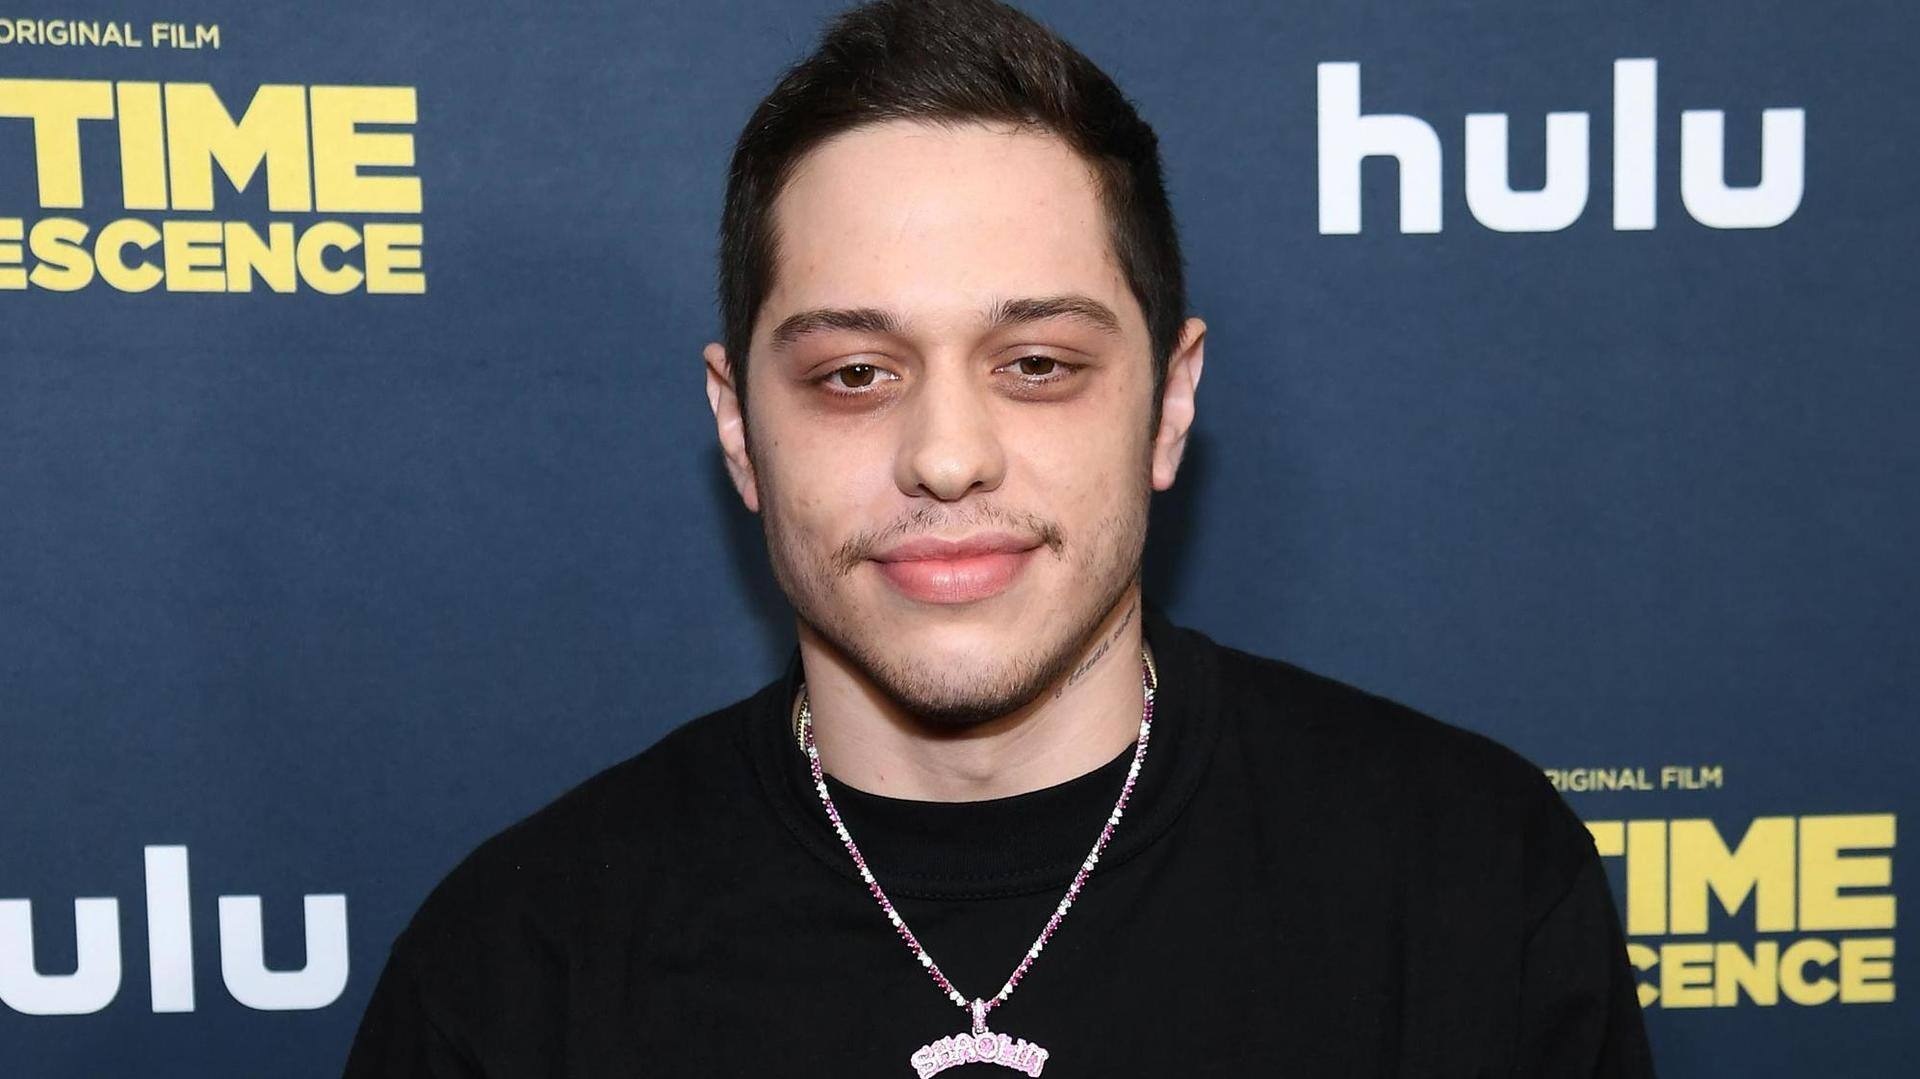 Actor-comedian Pete Davidson received 50hrs of community service: Here's why